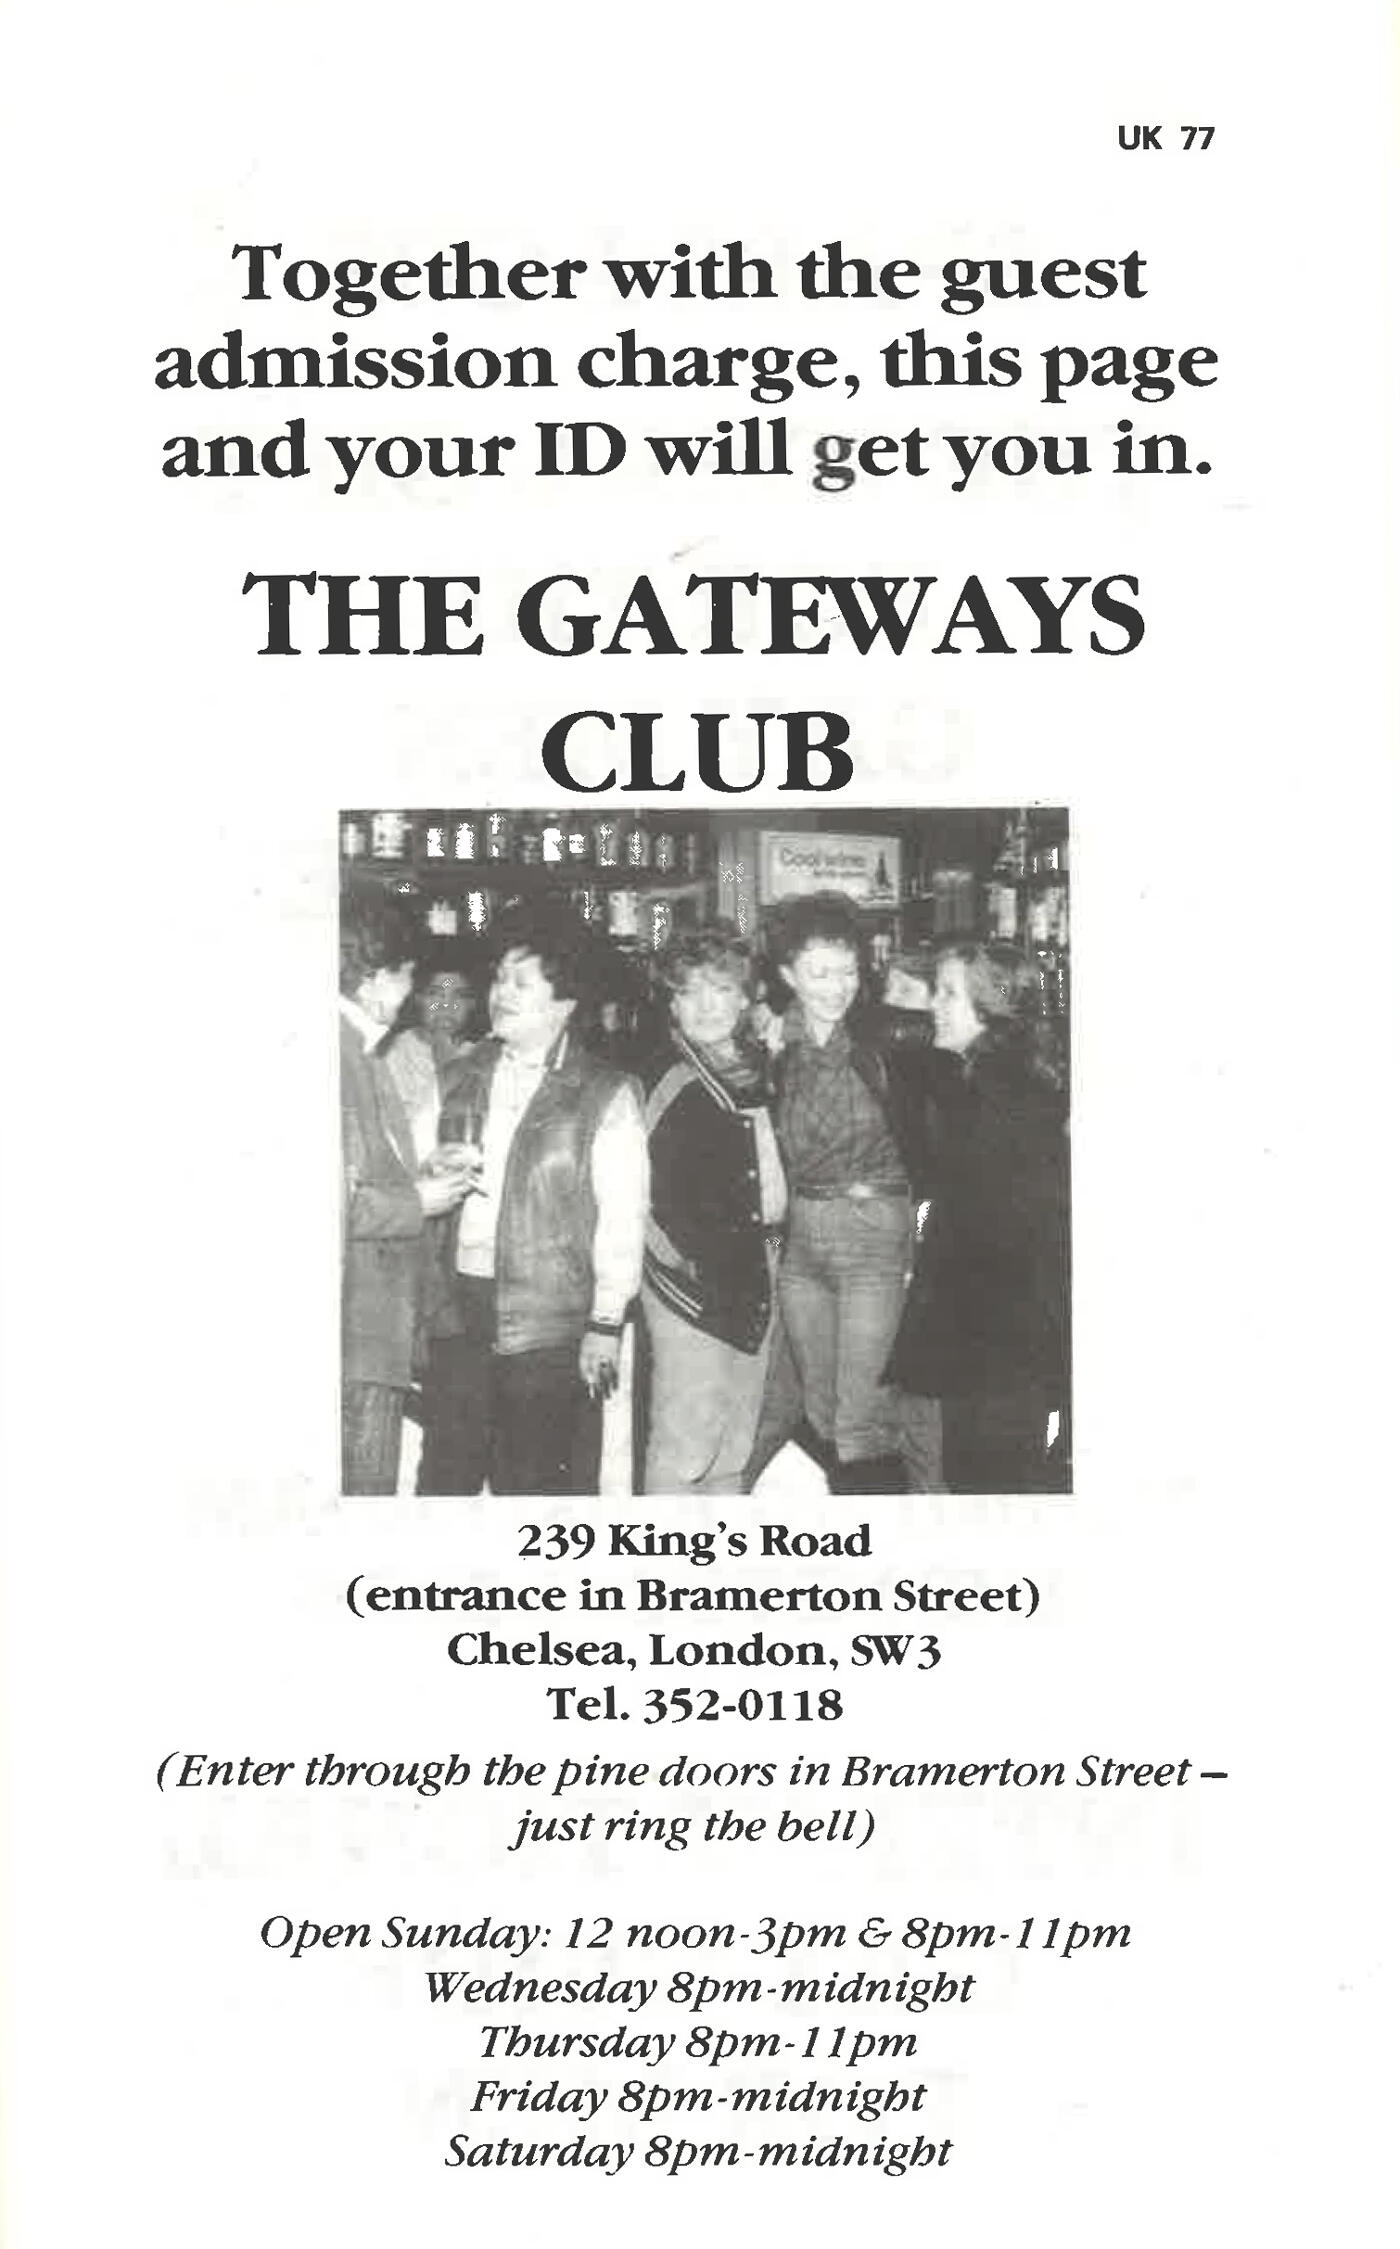 Advert for the Gateways Club in Gaia's Guide